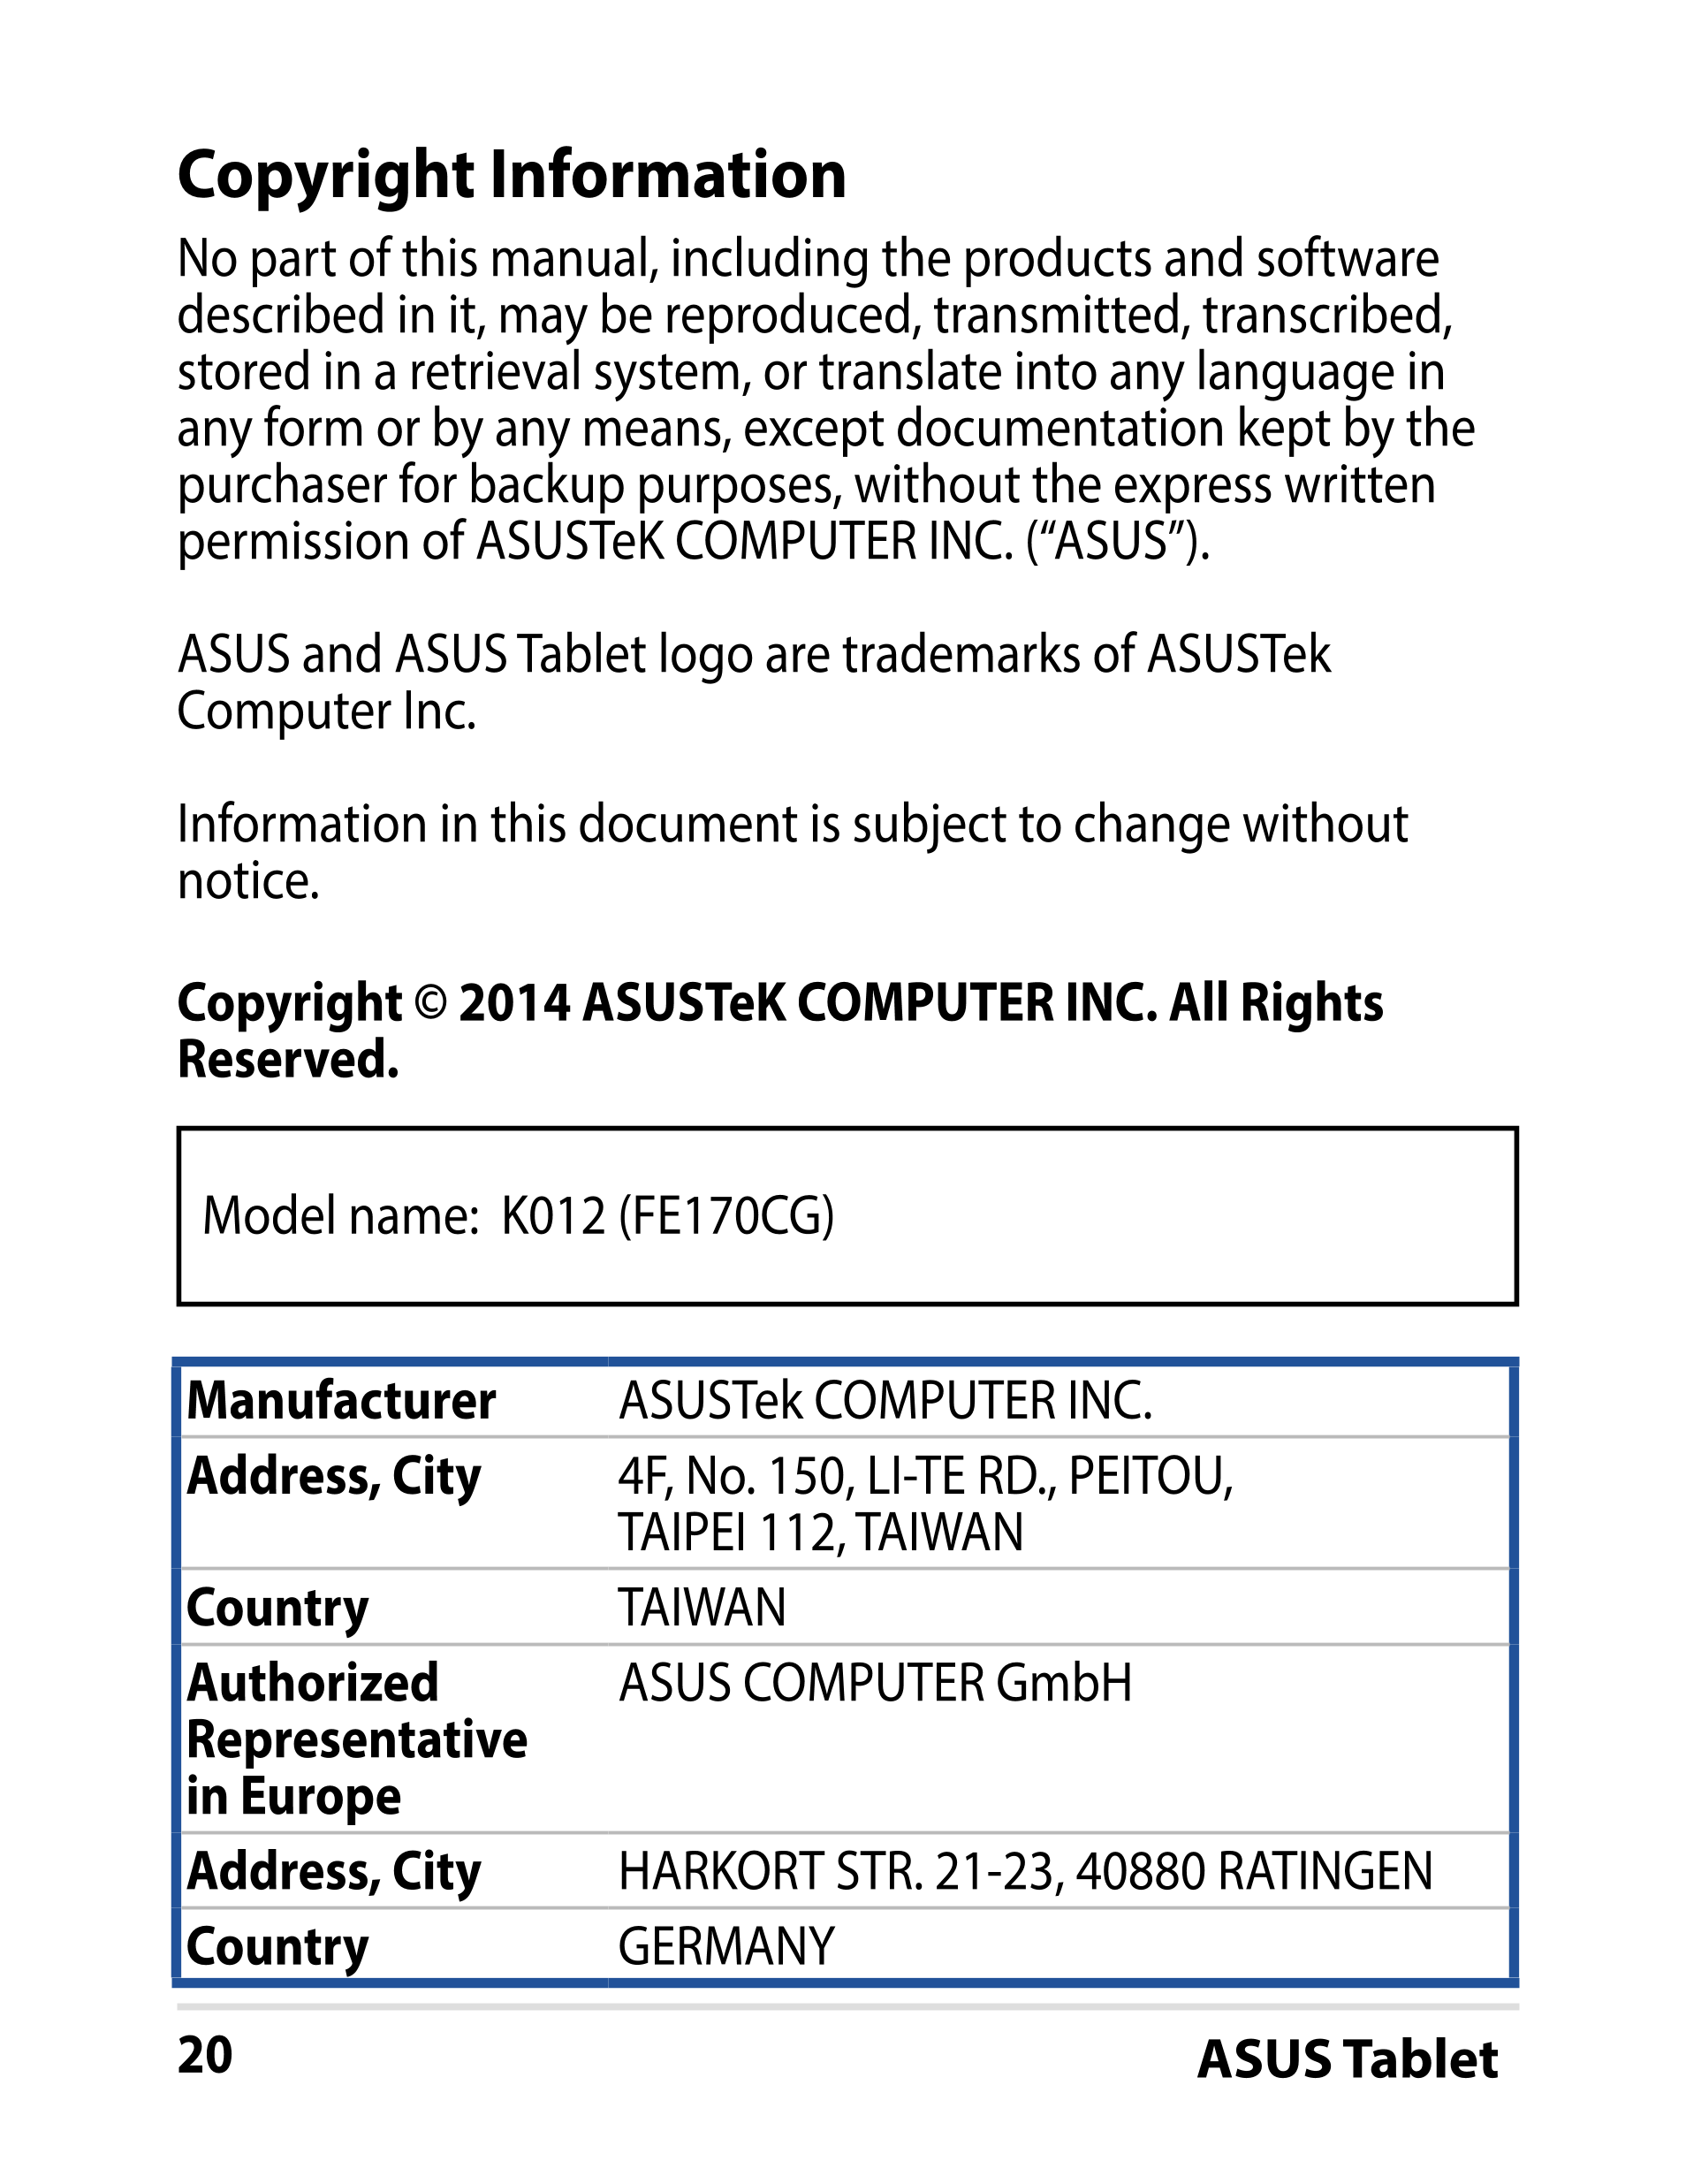 Copyright Information
No part of this manual, including the products and software 
described in it, may be reproduced, transmitt